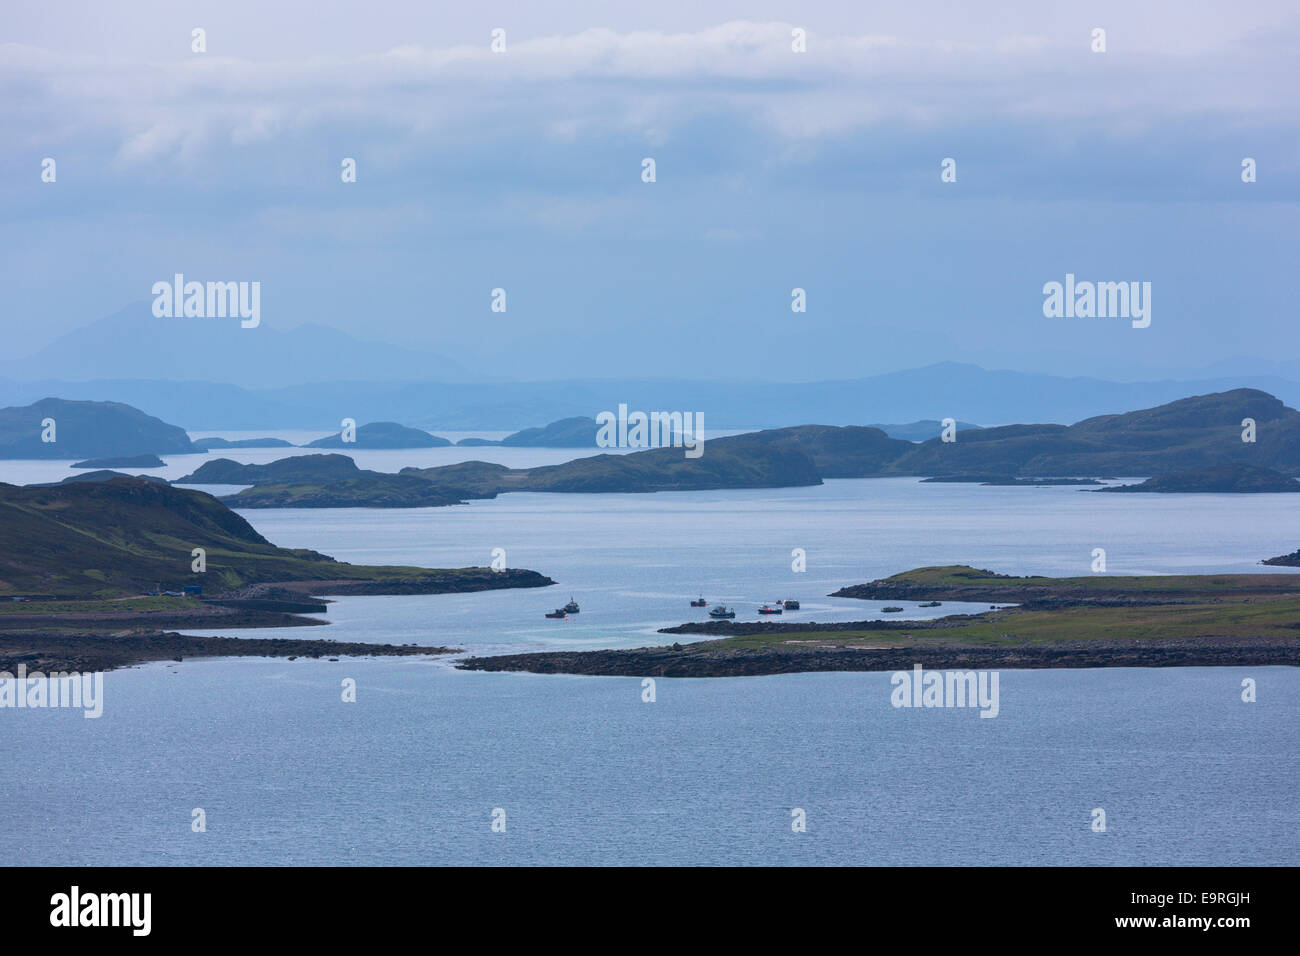 The Summer Isles, part of the Inner Hebrides, and the Outer Hebrides view from Altandhu on the West Coast of SCOTLAND Stock Photo